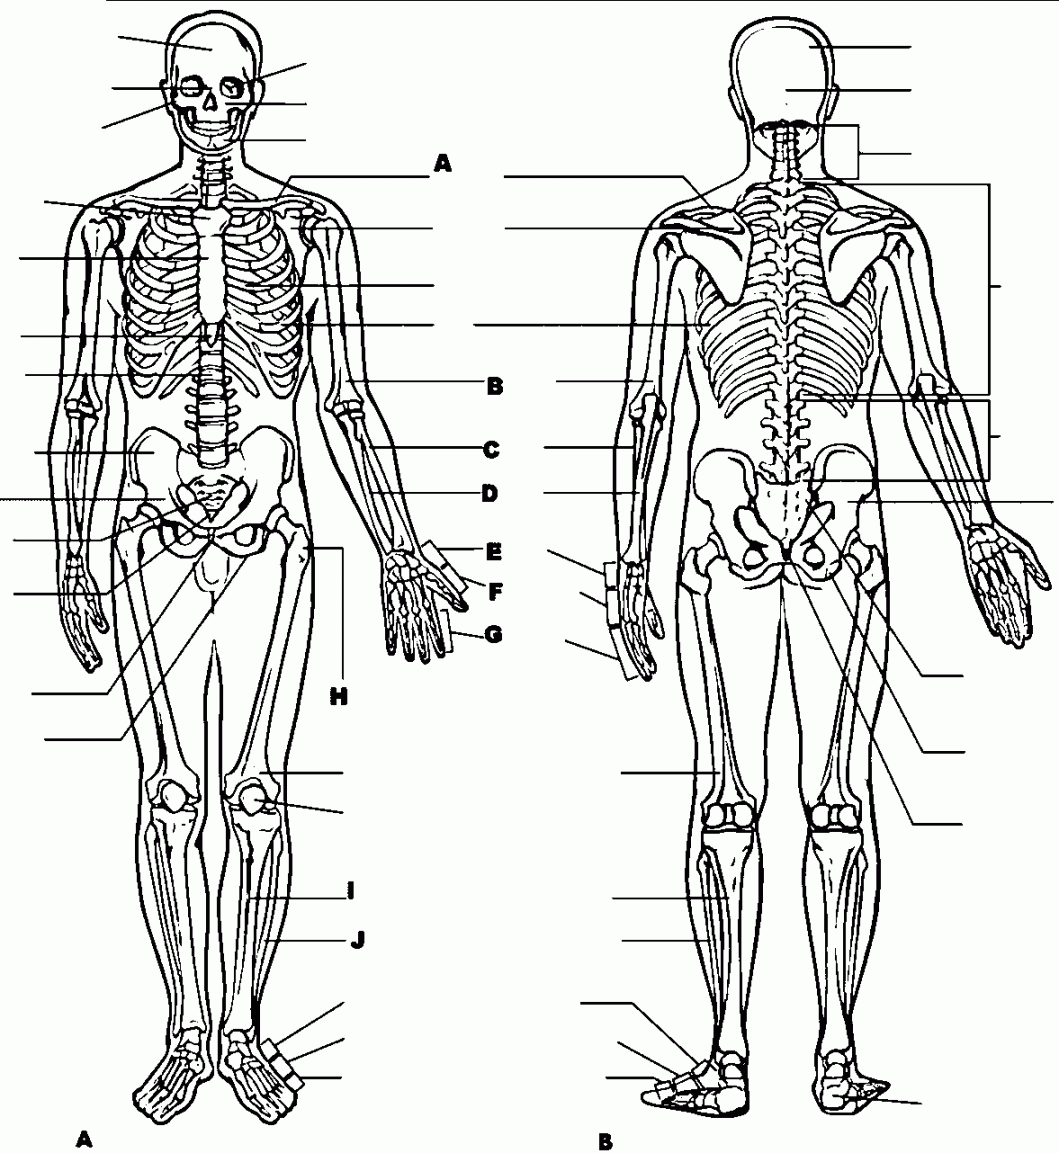 Anatomy And Physiology Coloring - Coloring Home - FREE Printables - Free Printable Anatomy And Physiology Coloring Pages